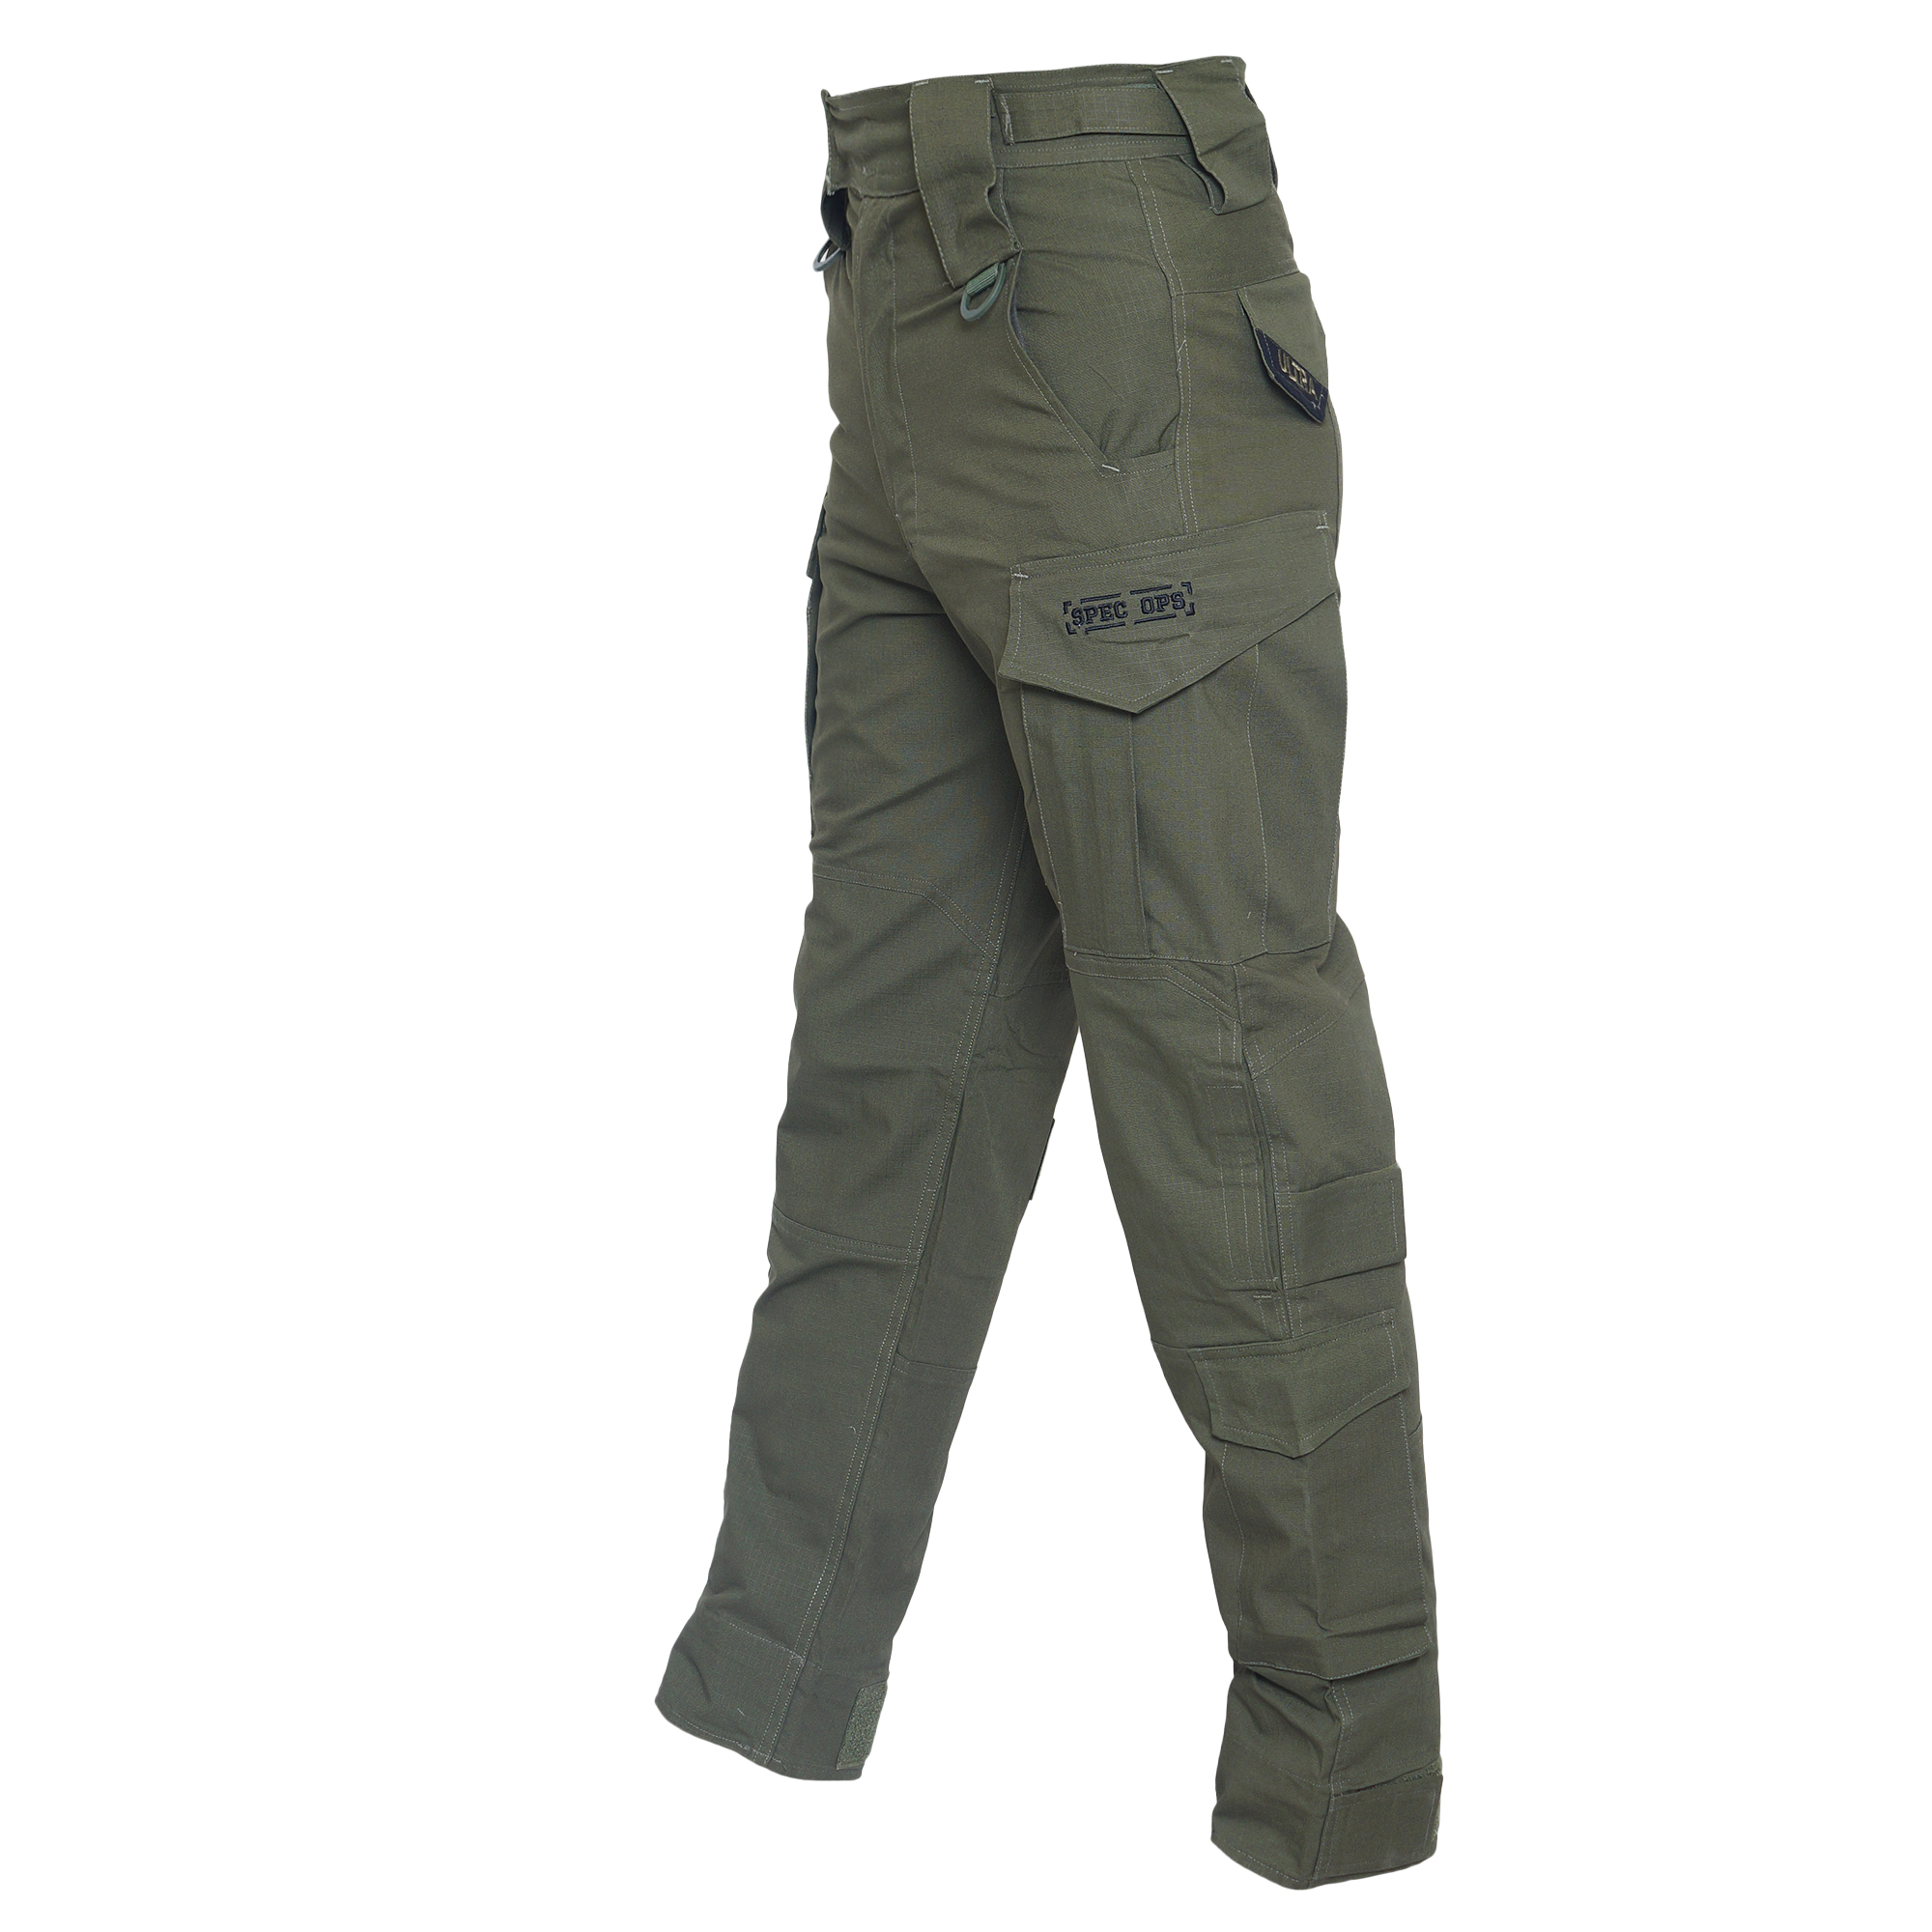 Tarmac Nomad 2 Black Riding Pant  Buy online in India